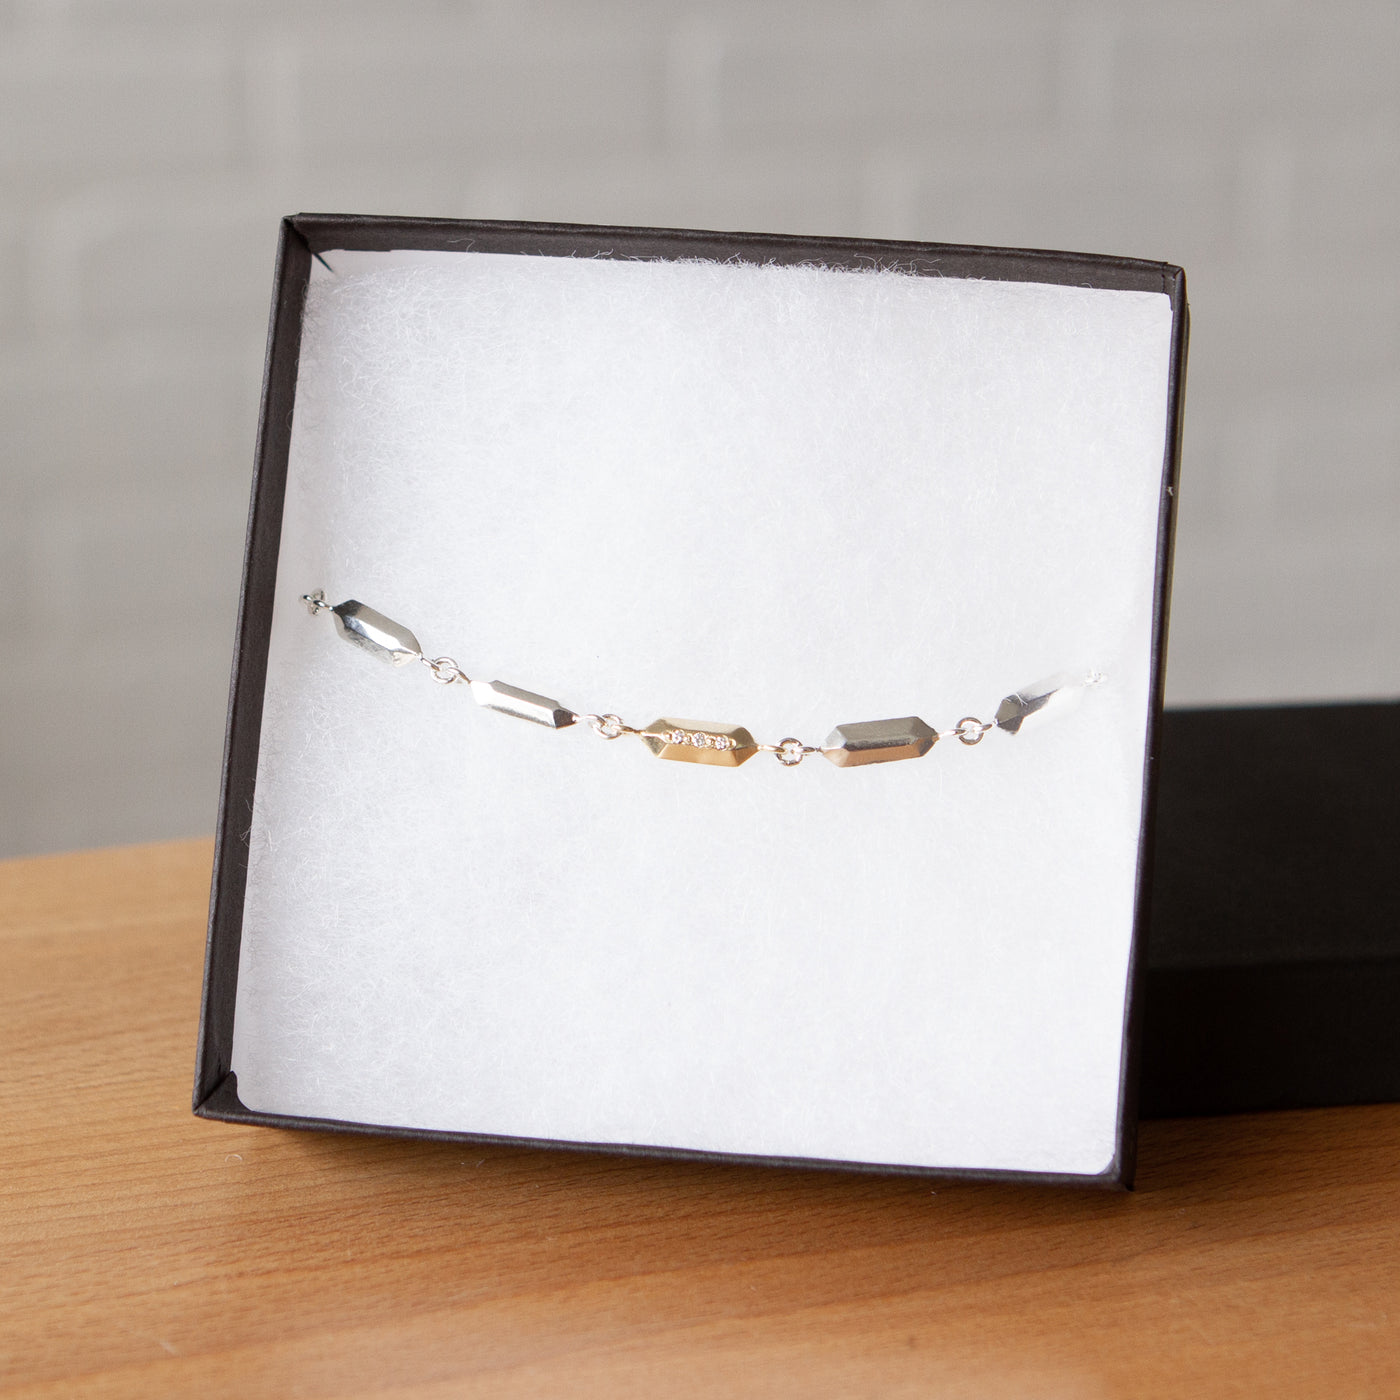 Fragment Link Bracelet with Gold Link on wooden table in packaging